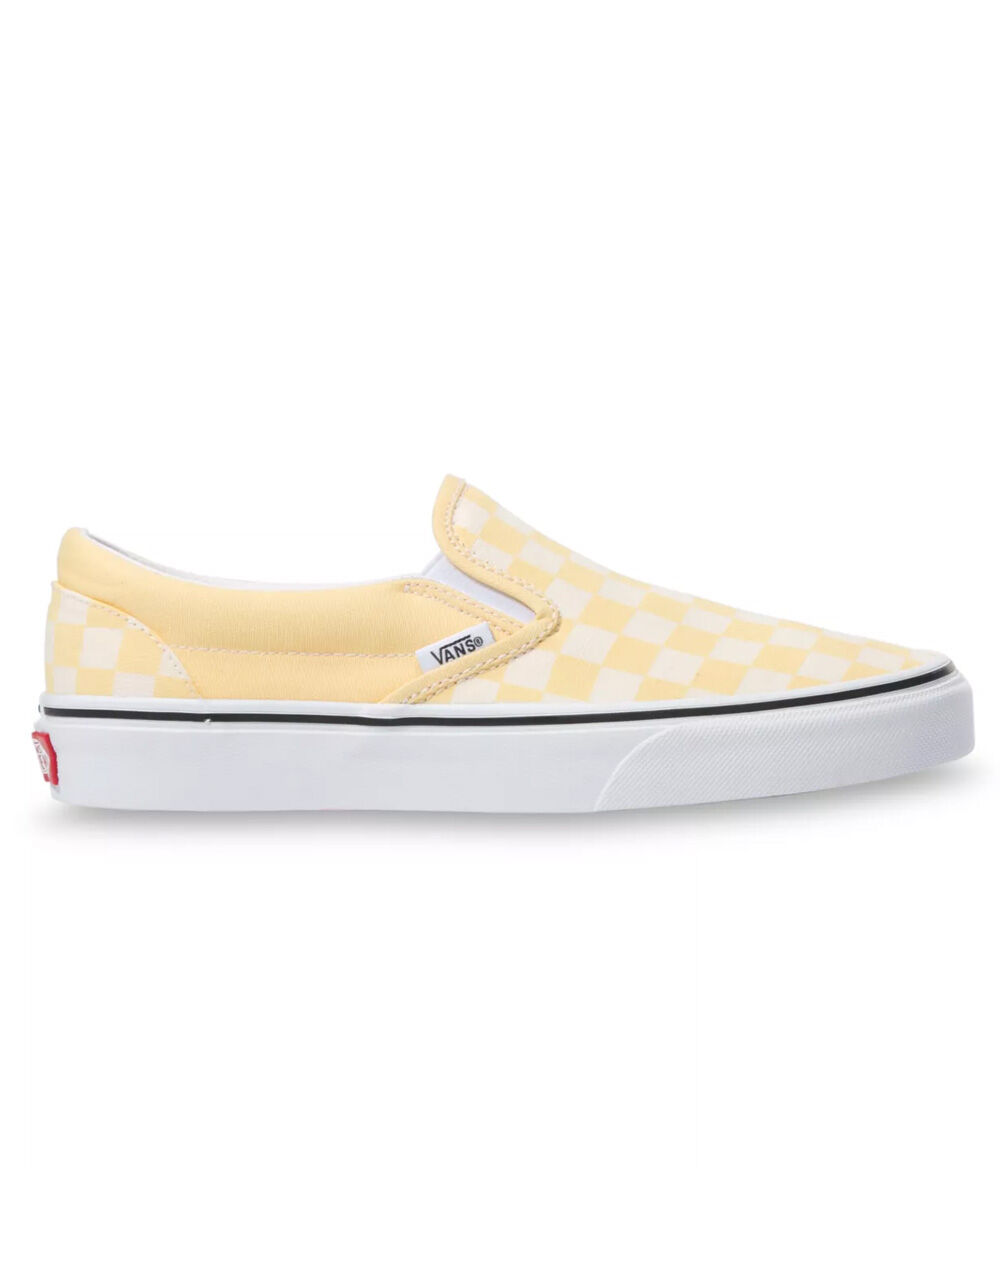 Vans, Shoes, Vans Size 75 Yellow Checkerboard Slip On Shoes New With Tags